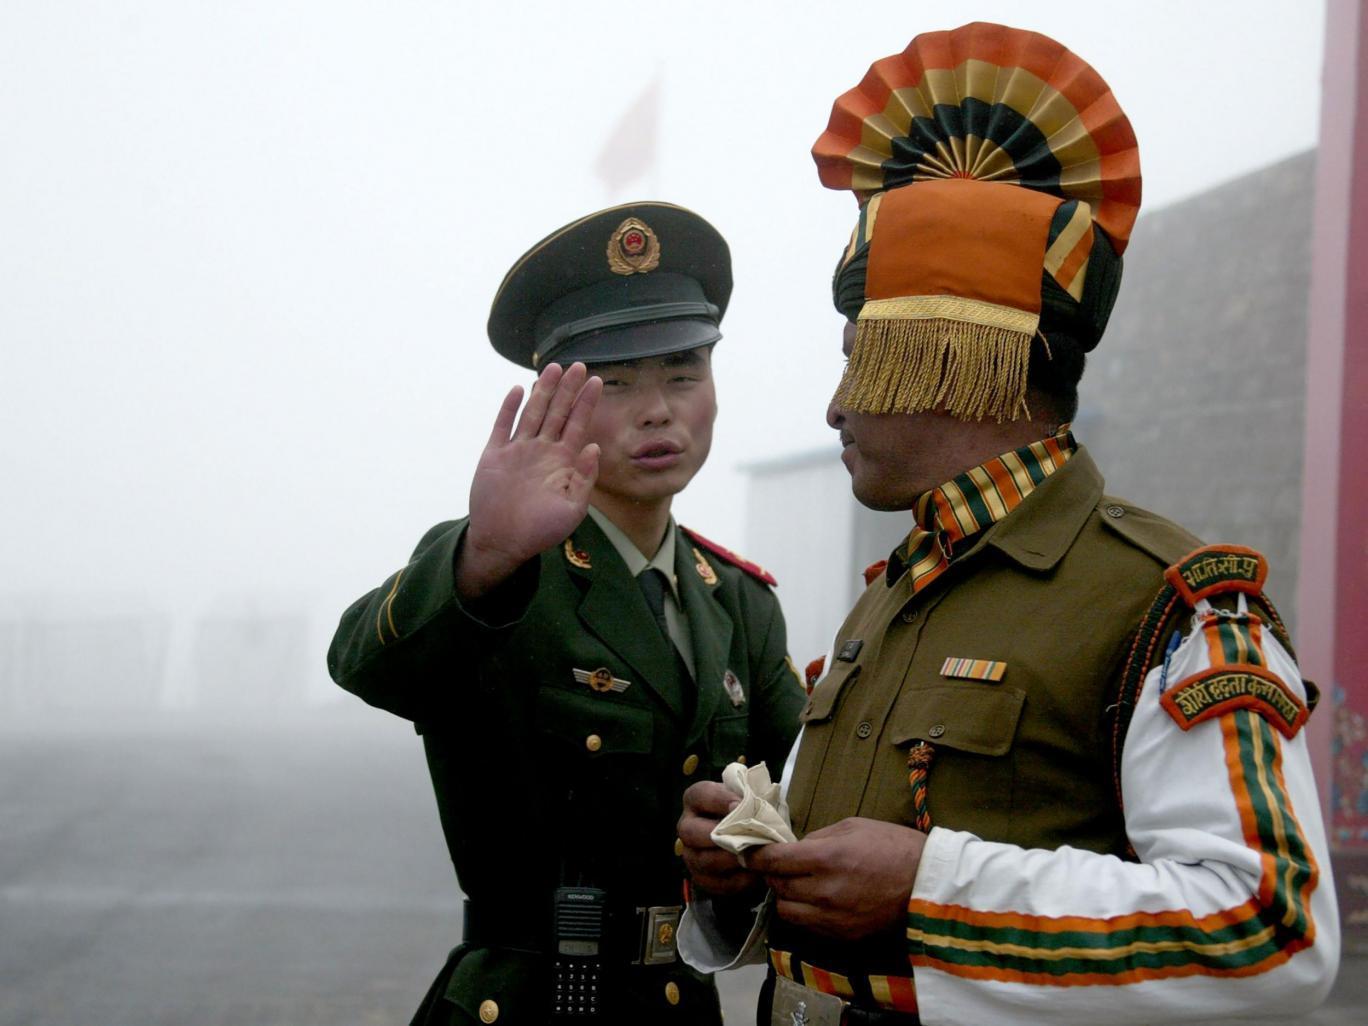 China has stepped up its rhetoric in an increasingly tense border row with India